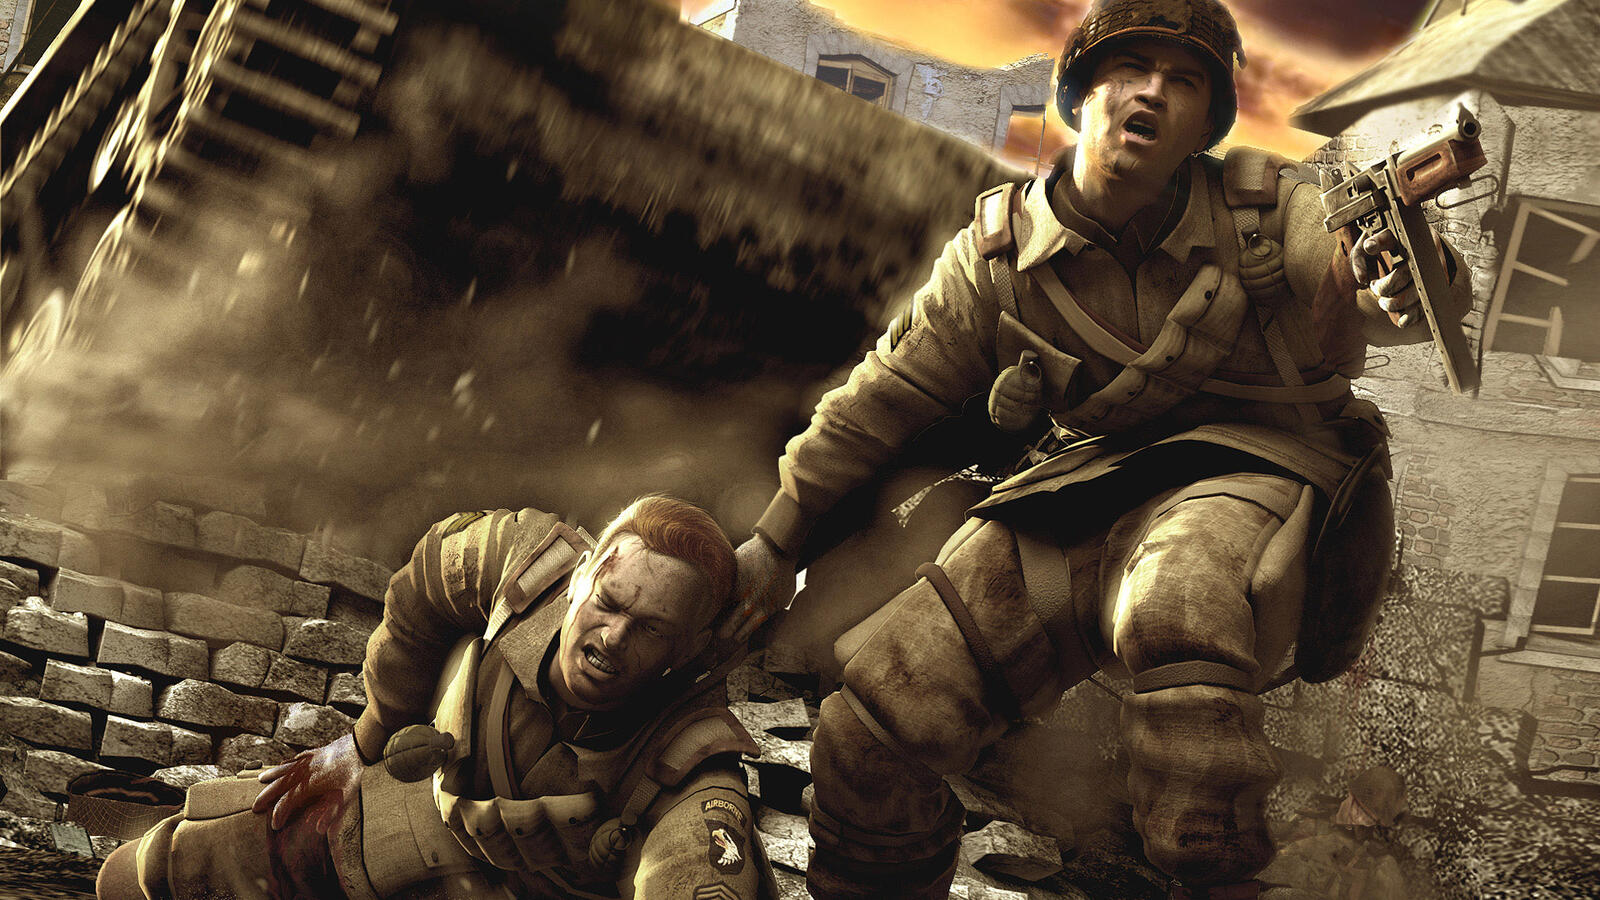 Wallpapers war soldiers wounded on the desktop